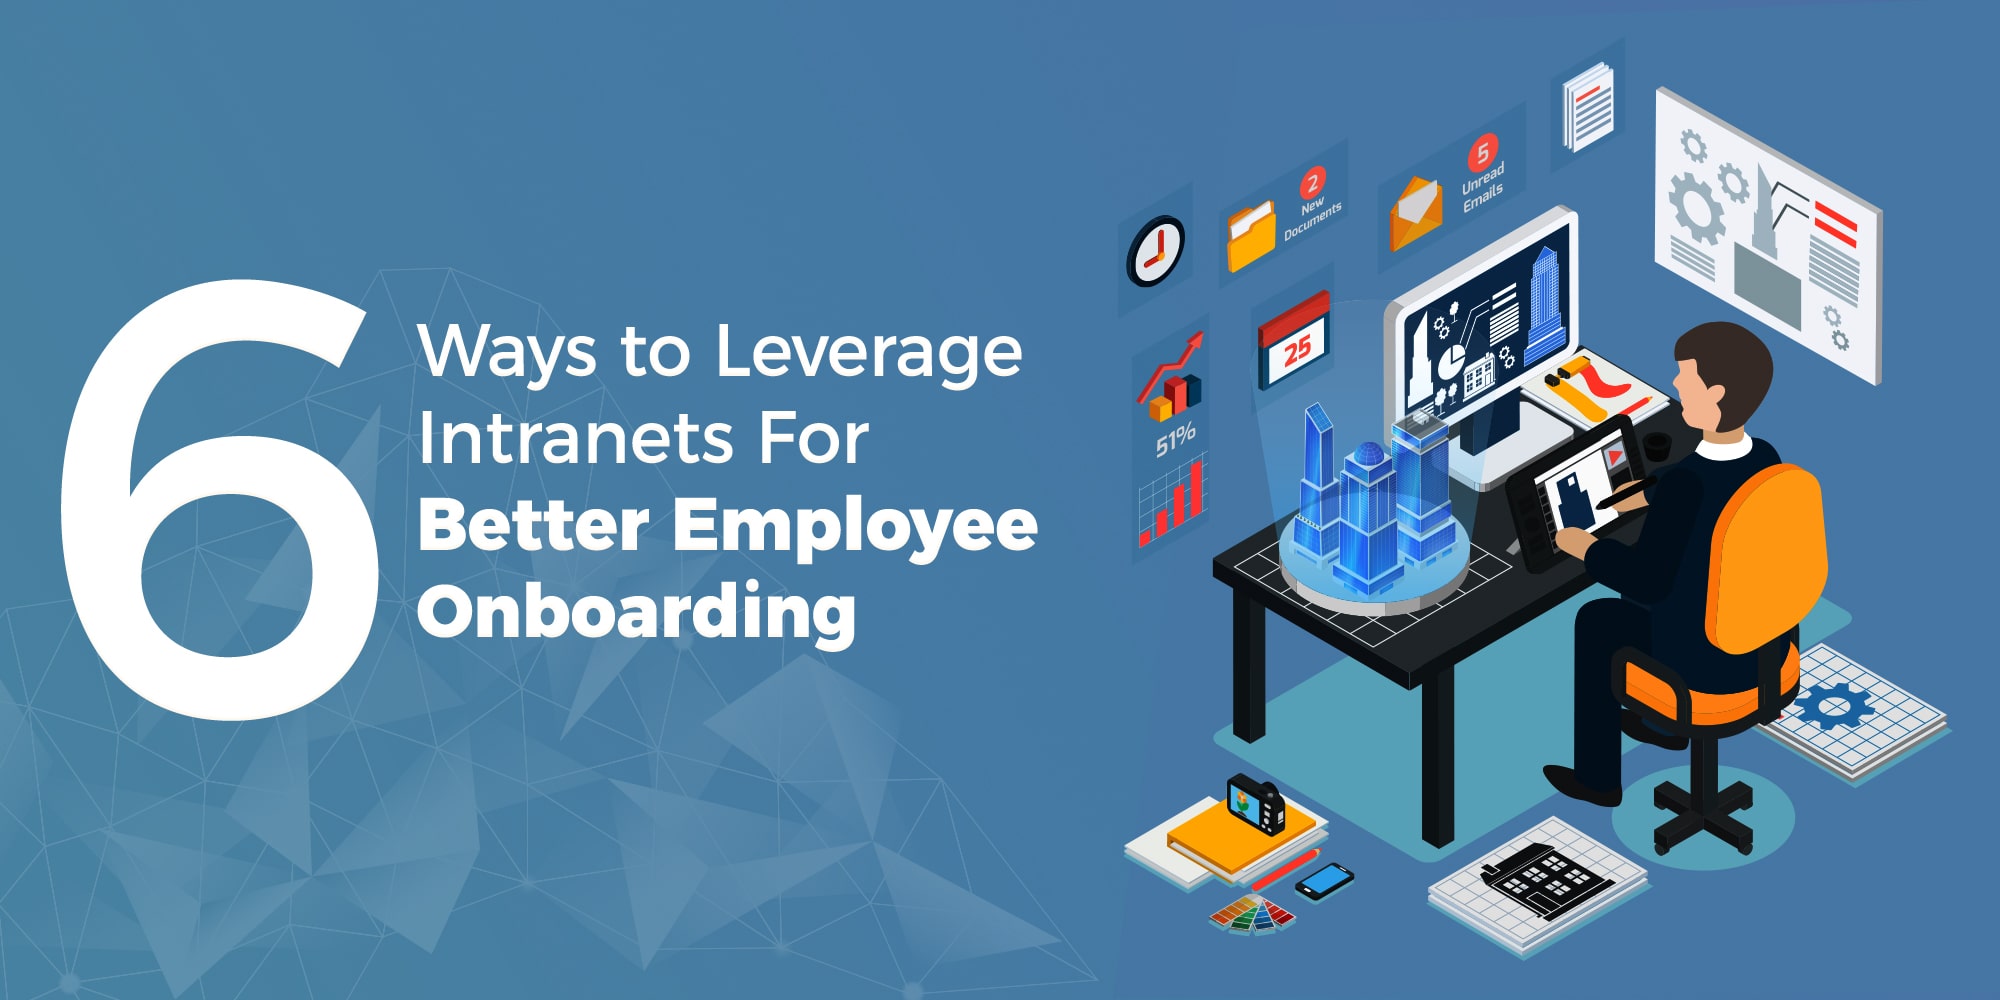 6 Ways To Leverage Intranets For Better Employee Onboarding